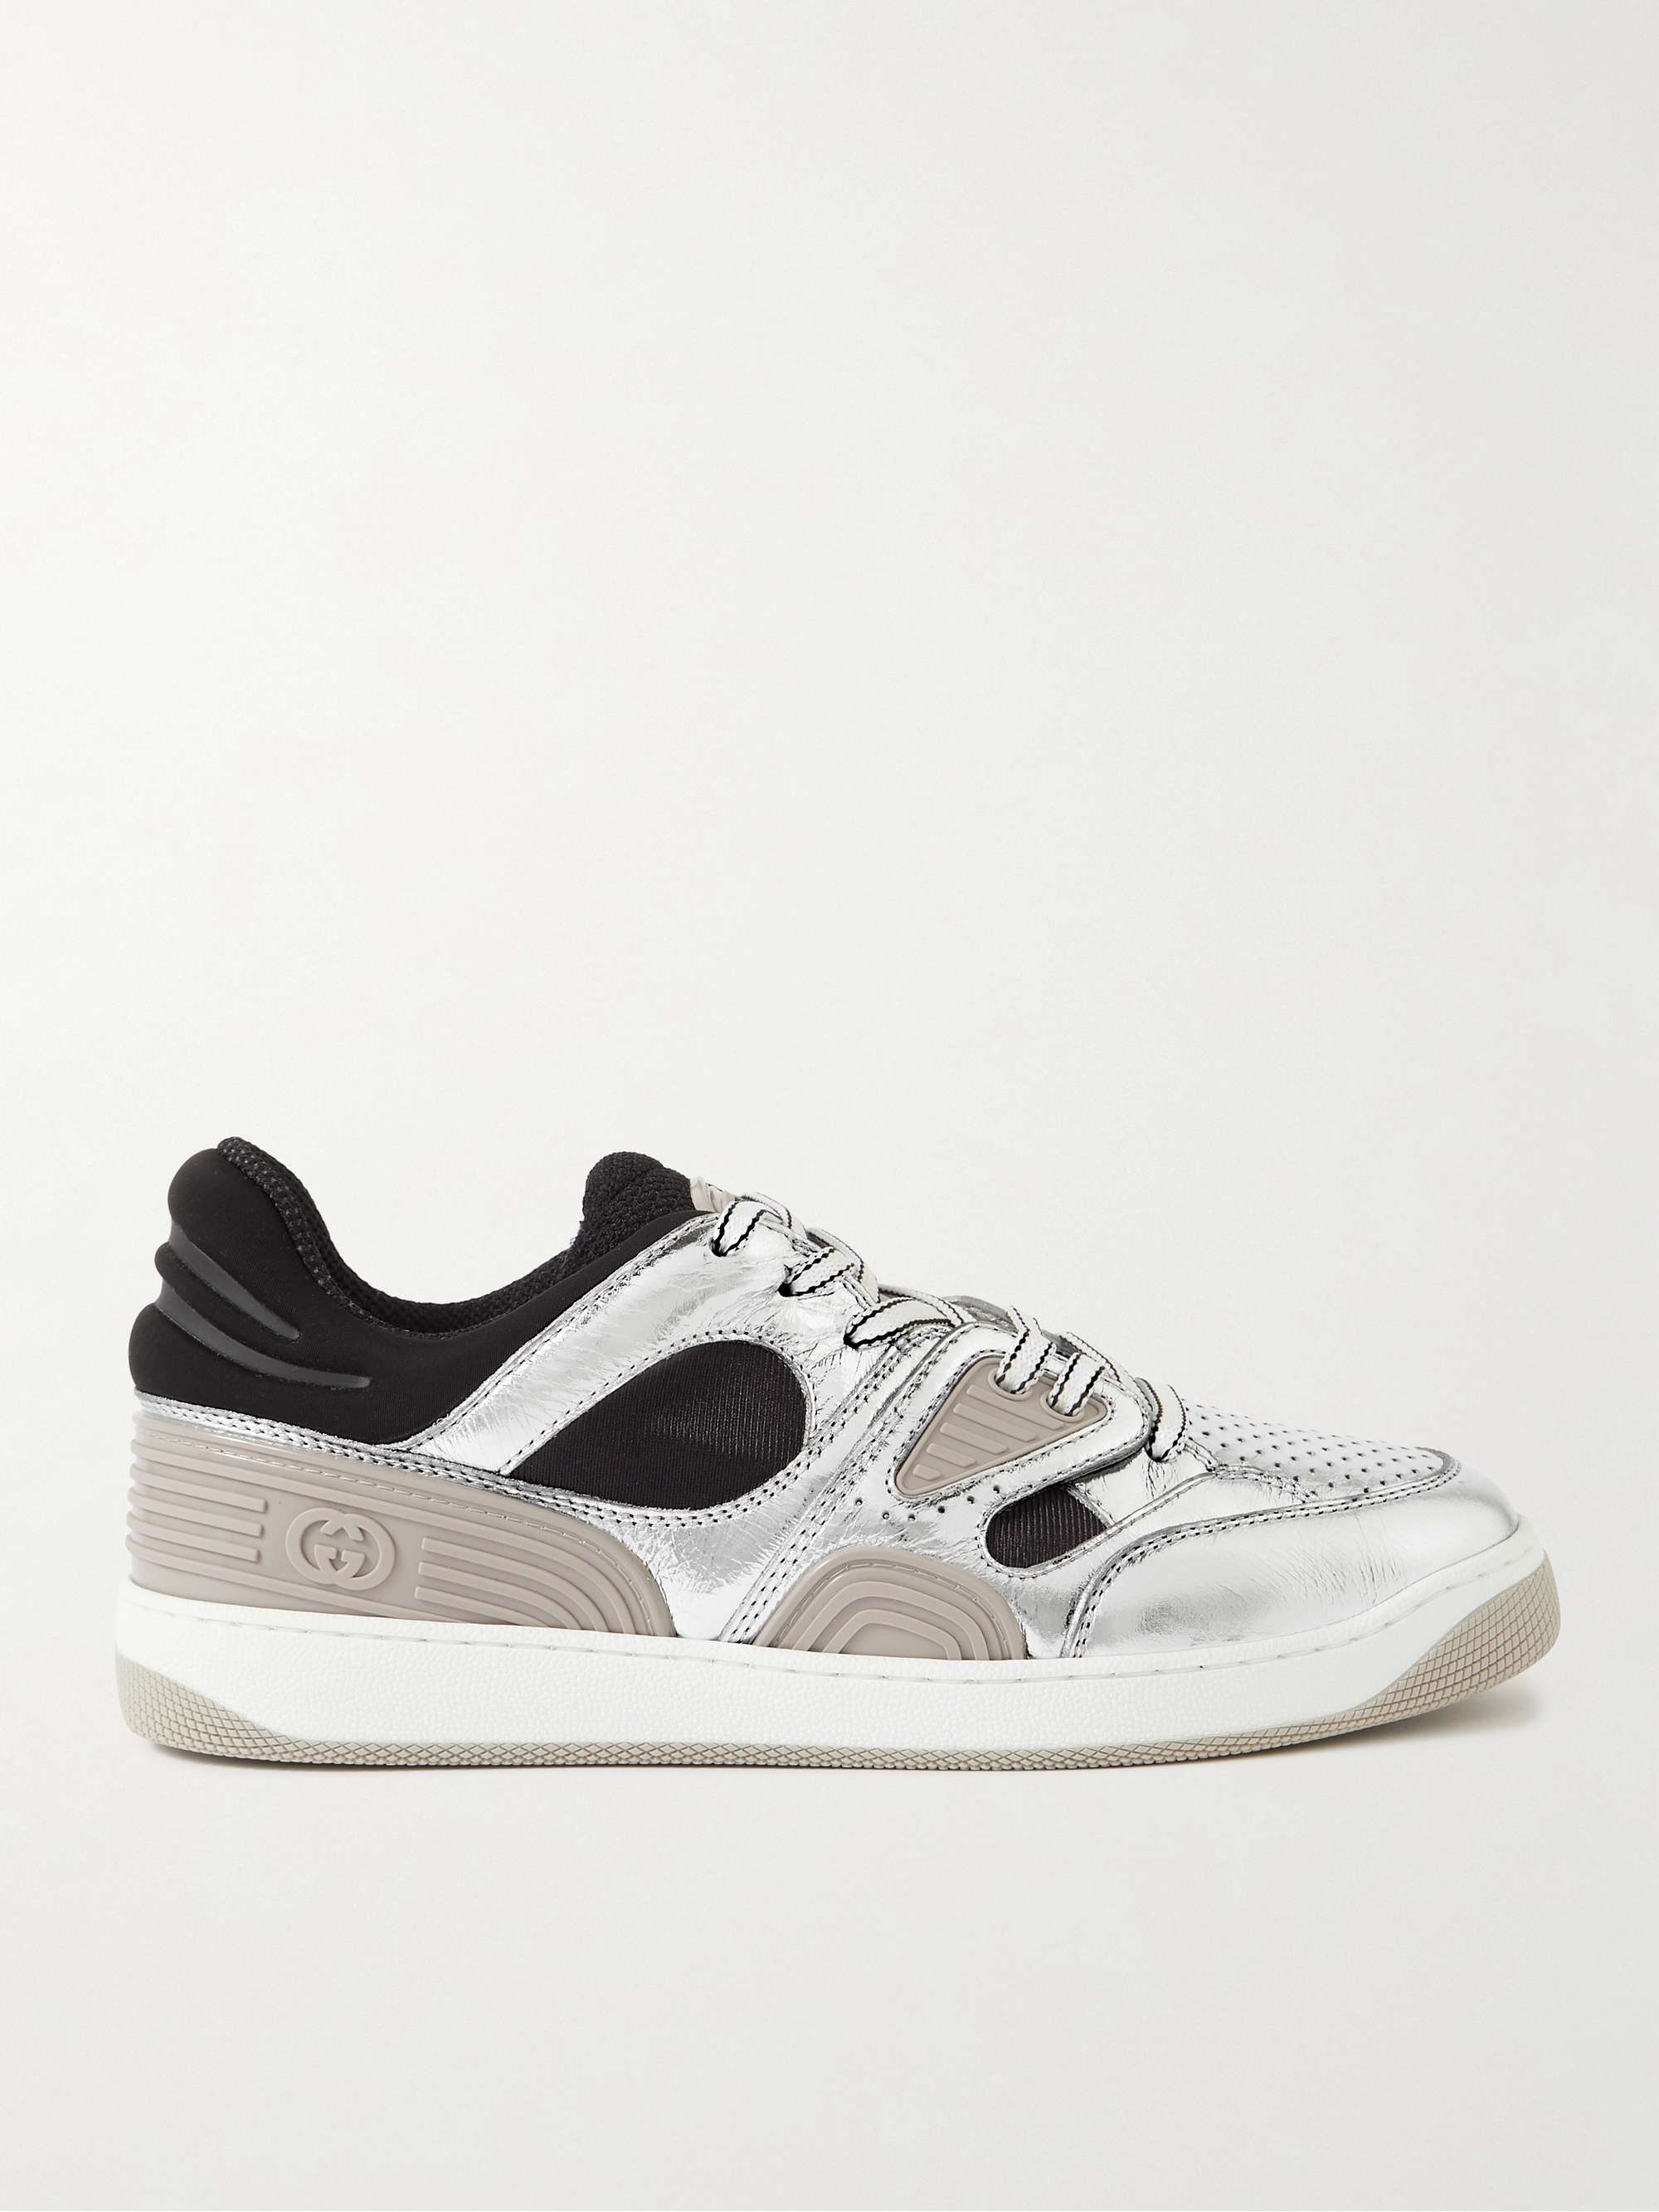 Silver Basket Distressed Metallic Leather, Jersey, Mesh and Rubber Sneakers  | GUCCI | MR PORTER